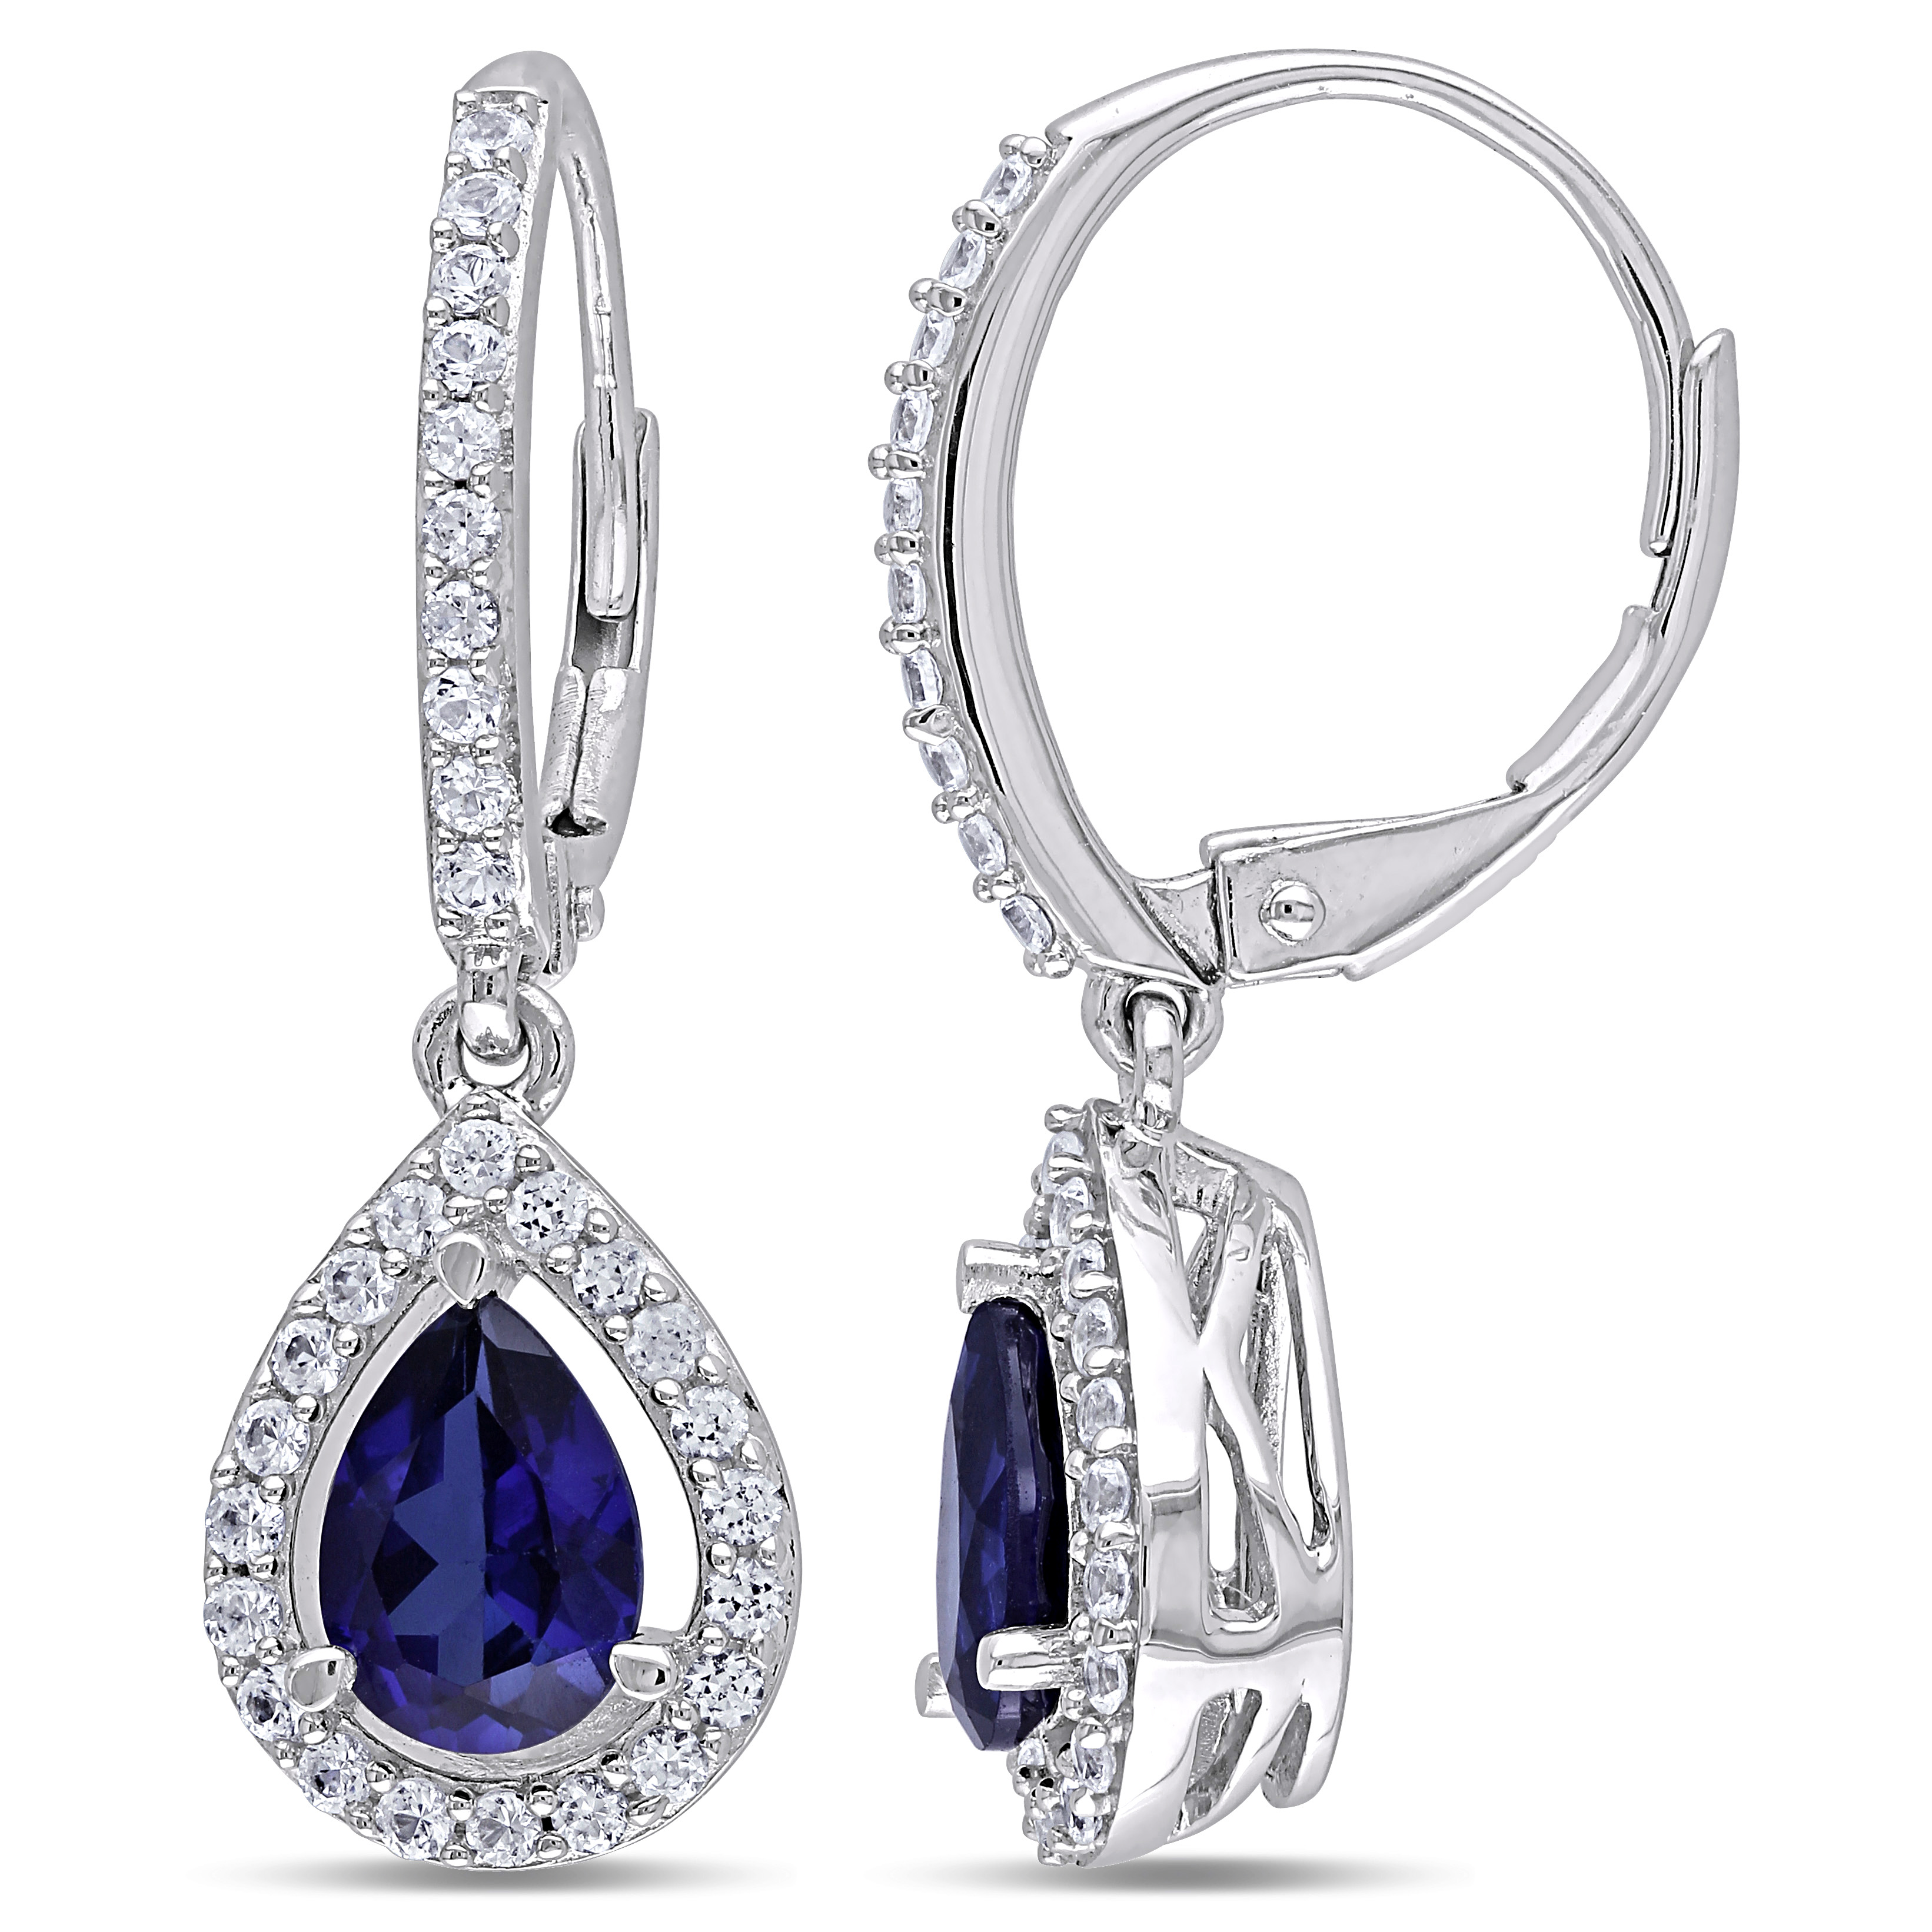 2 7/8 CT TGW Created Blue and White Sapphire Teardrop Leverback Earrings in Sterling Silver